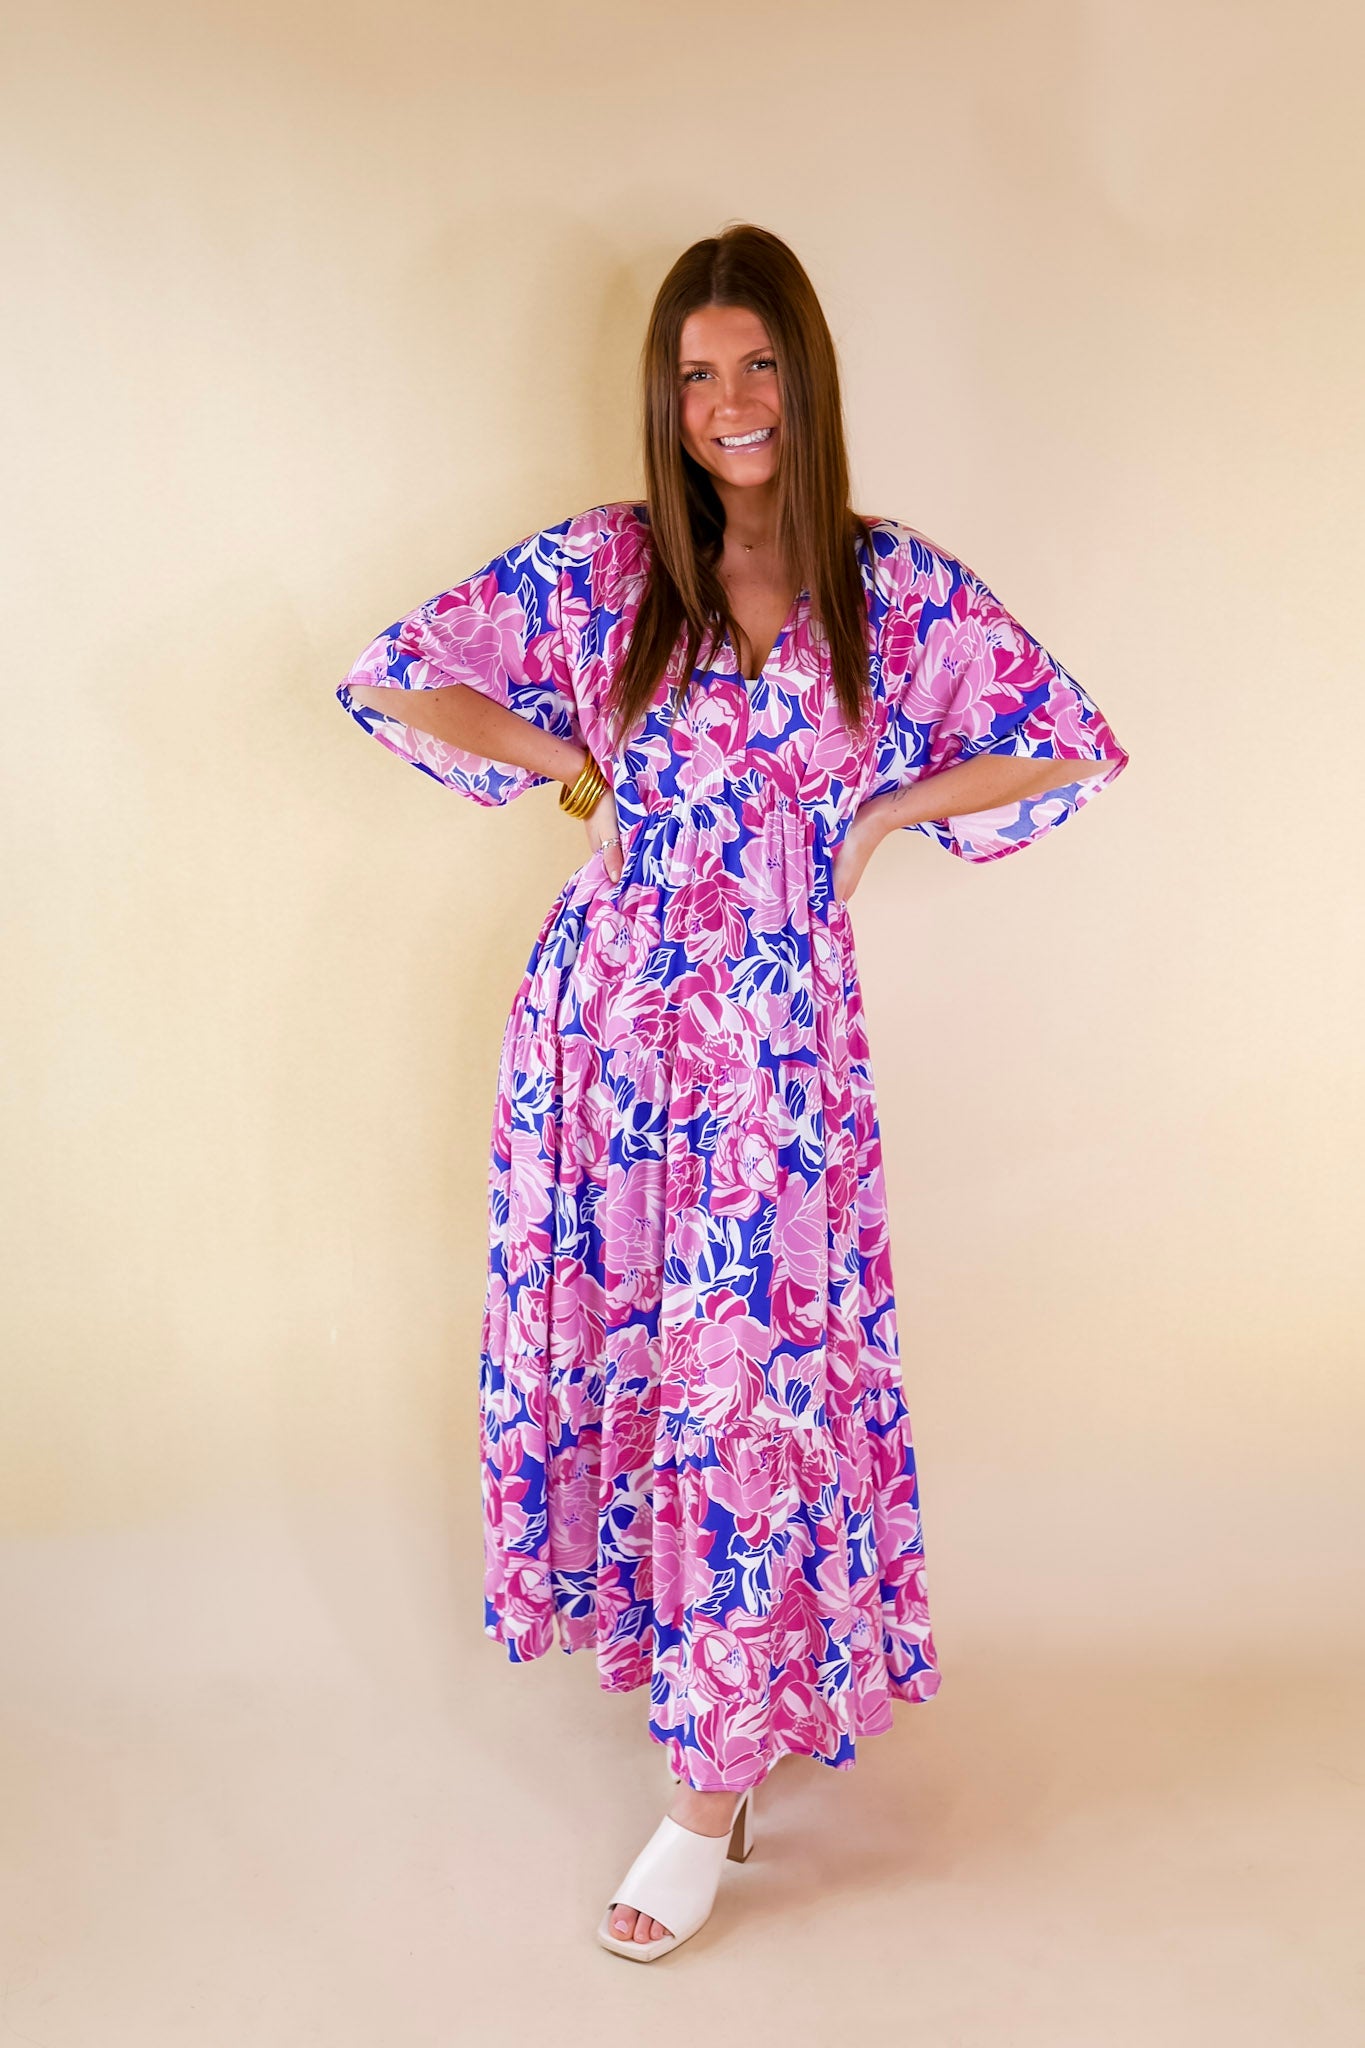 Waving Hello Floral Maxi Dress with V Neckline in Blue and Pink - Giddy Up Glamour Boutique